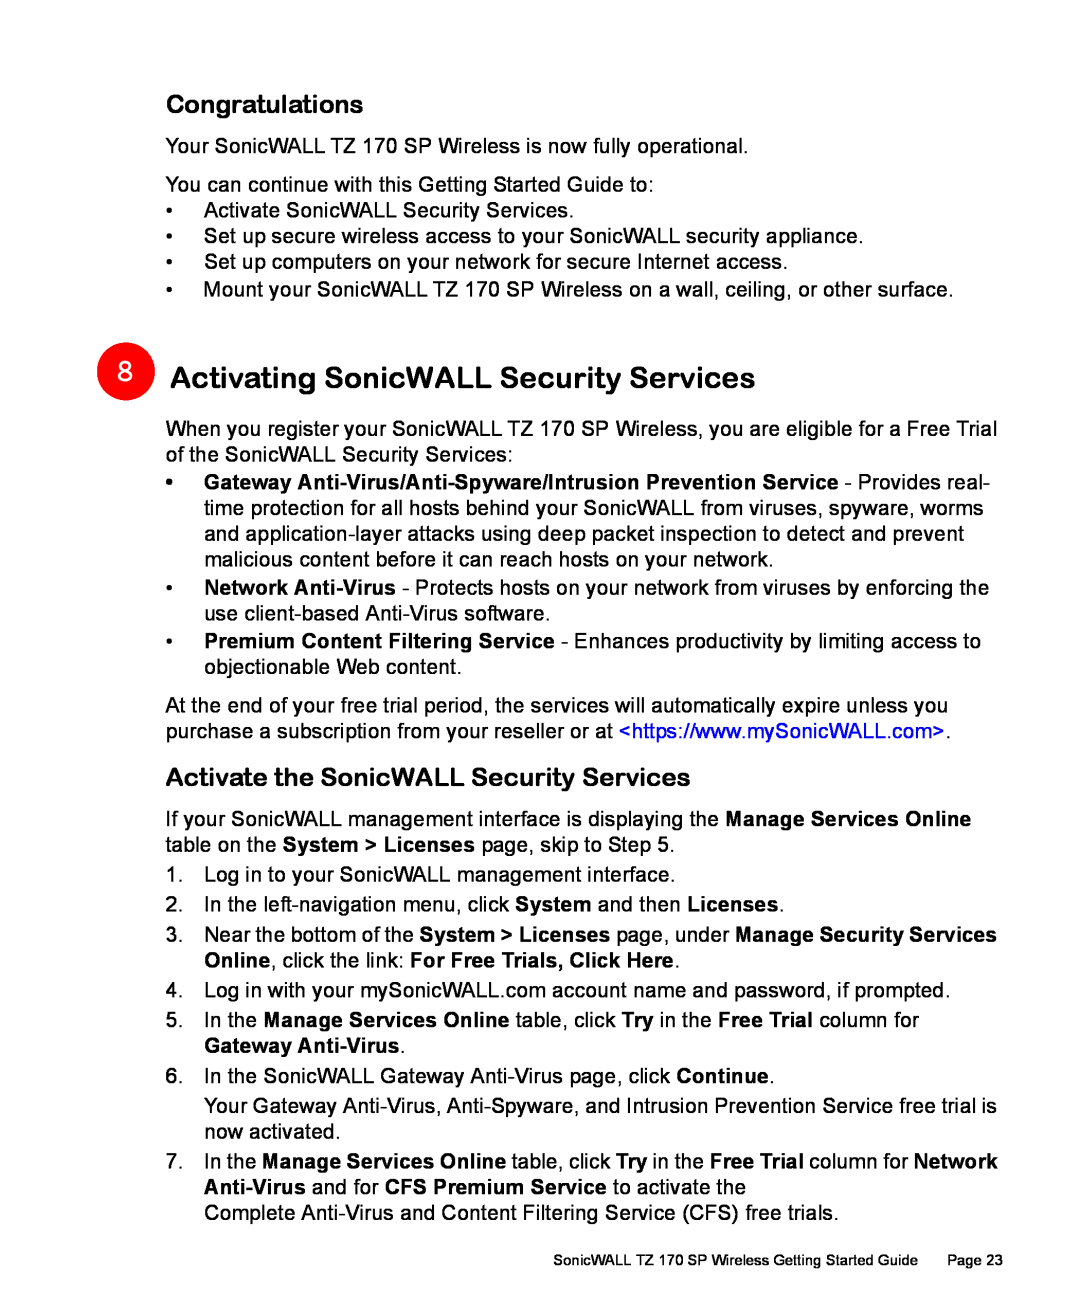 SonicWALL TZ 170 SP Activating SonicWALL Security Services, Congratulations, Activate the SonicWALL Security Services 